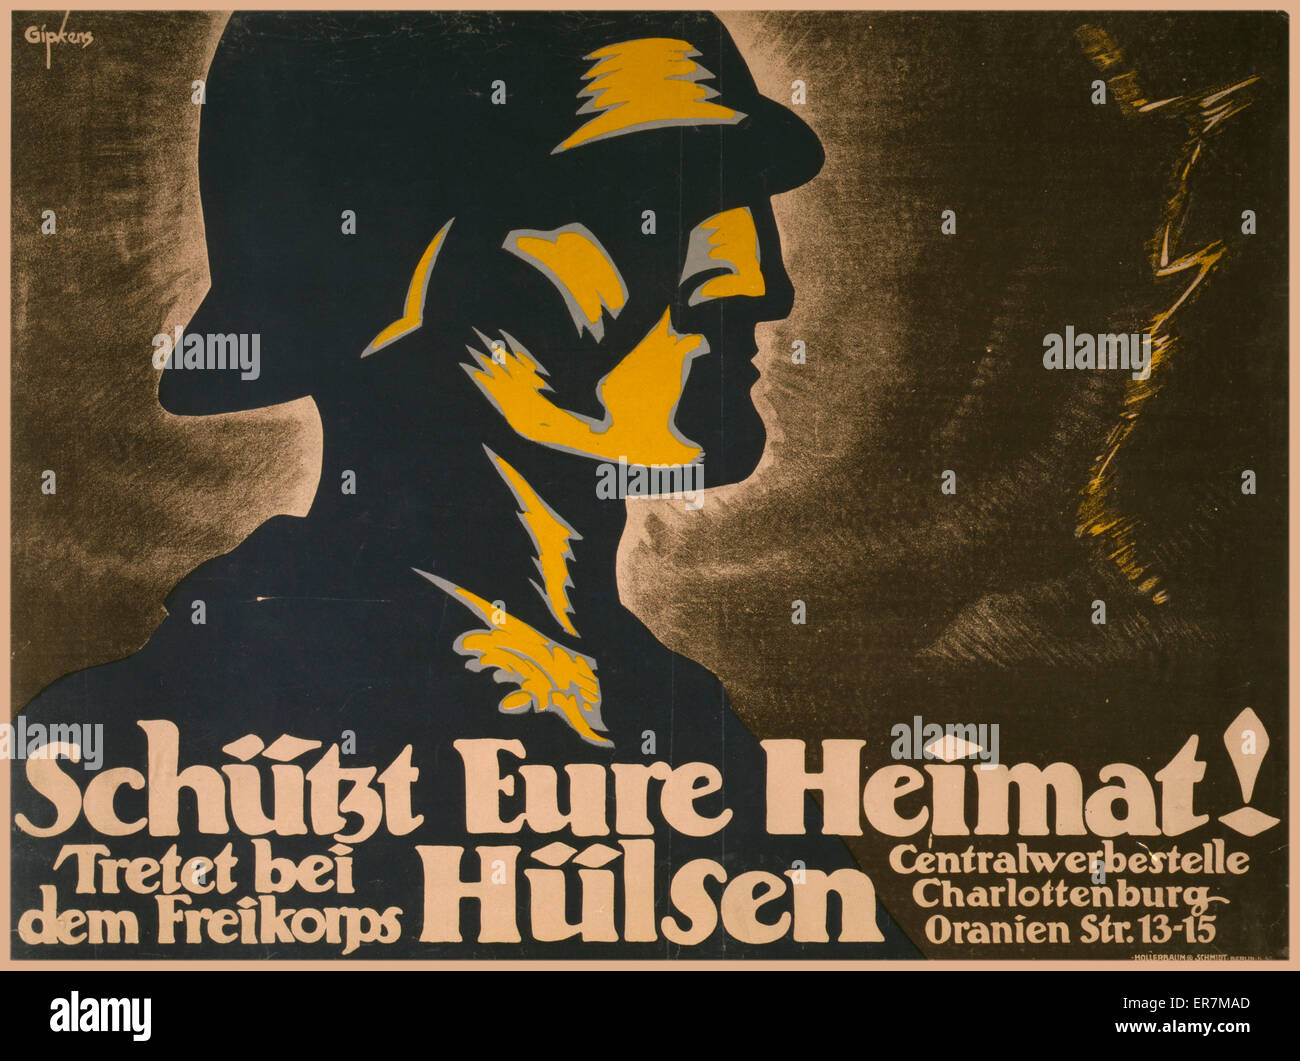 Schutz eure Heimat! Tretet bei dem Freikorps Hulsen. Poster shows stylized profile of German soldier. Text: Protect your homeland! Enlist in the Freikorps Hulsen. Date 1918. Schutz eure Heimat! Tretet bei dem Freikorps Hulsen. Poster shows stylized profil Stock Photo